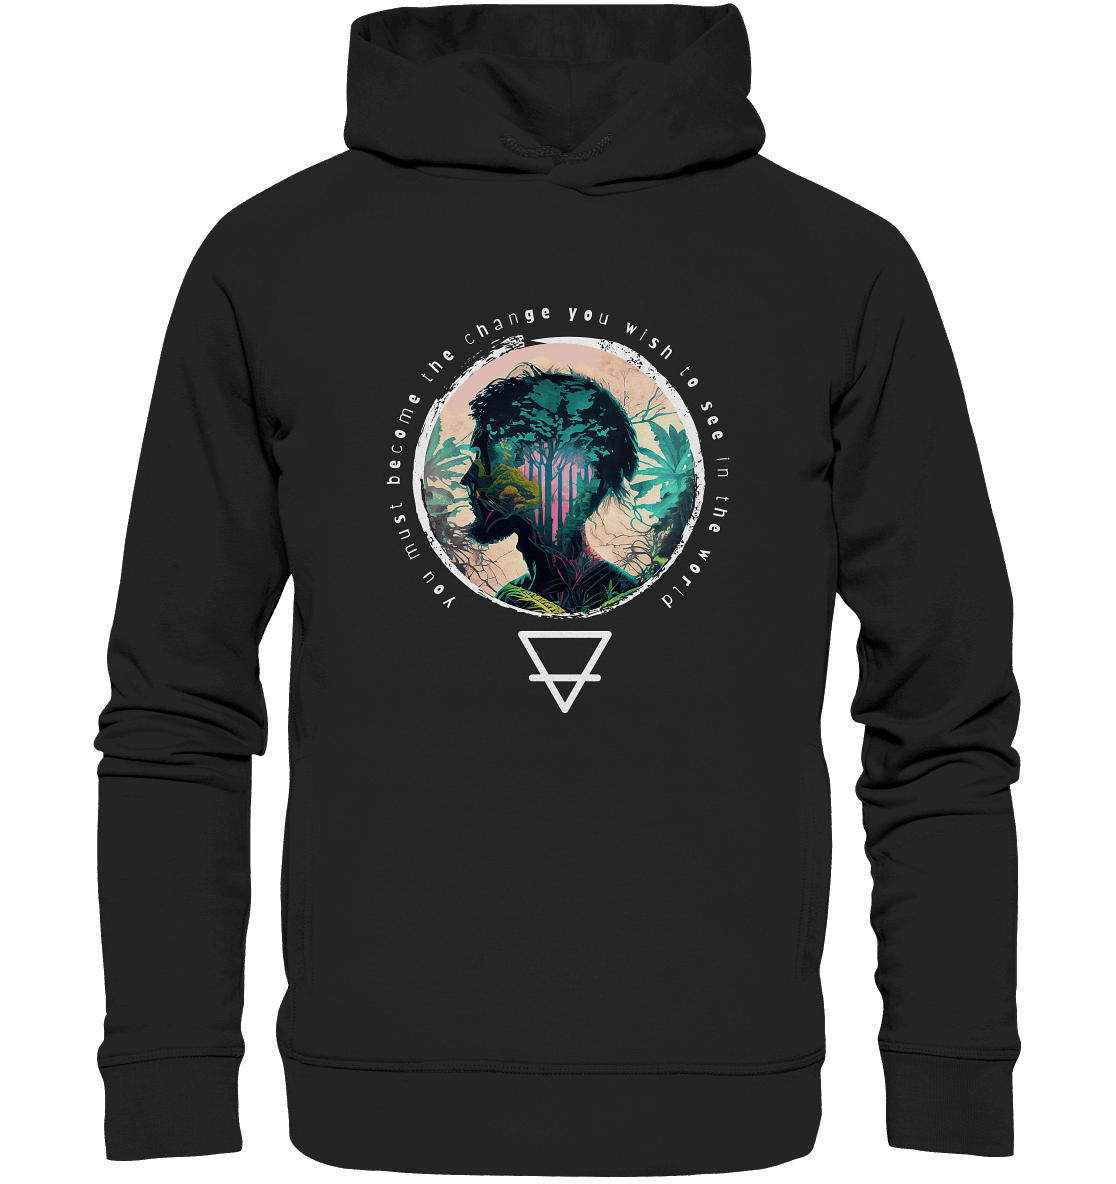 Nature - You must become the change you wish to see in the world  - Organic Fashion Hoodie